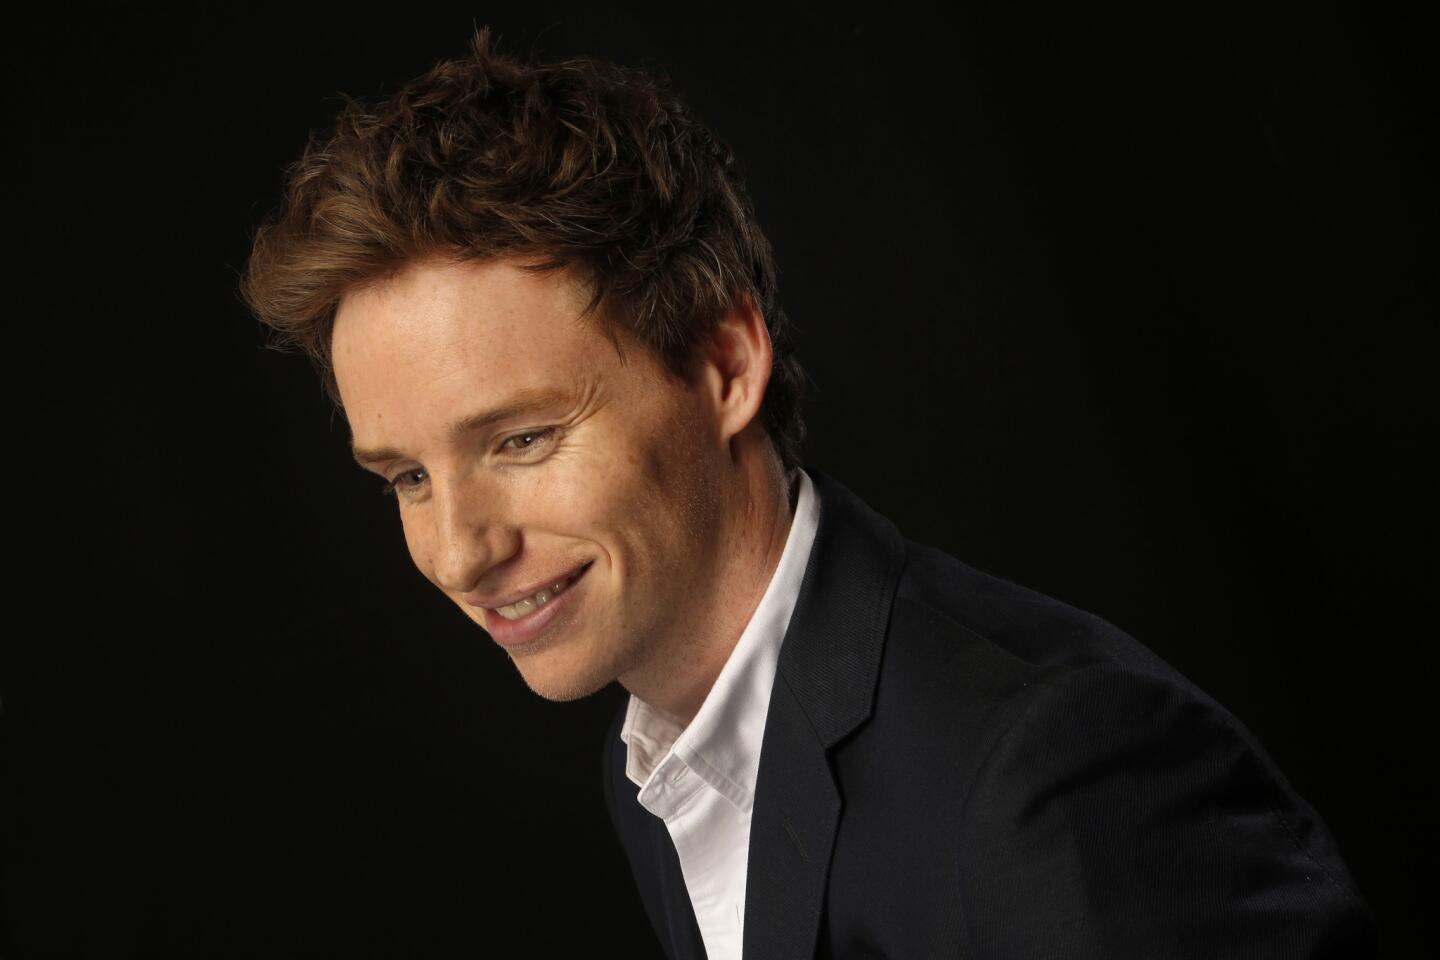 Lead actor | Eddie Redmayne, 'The Theory of Everything'